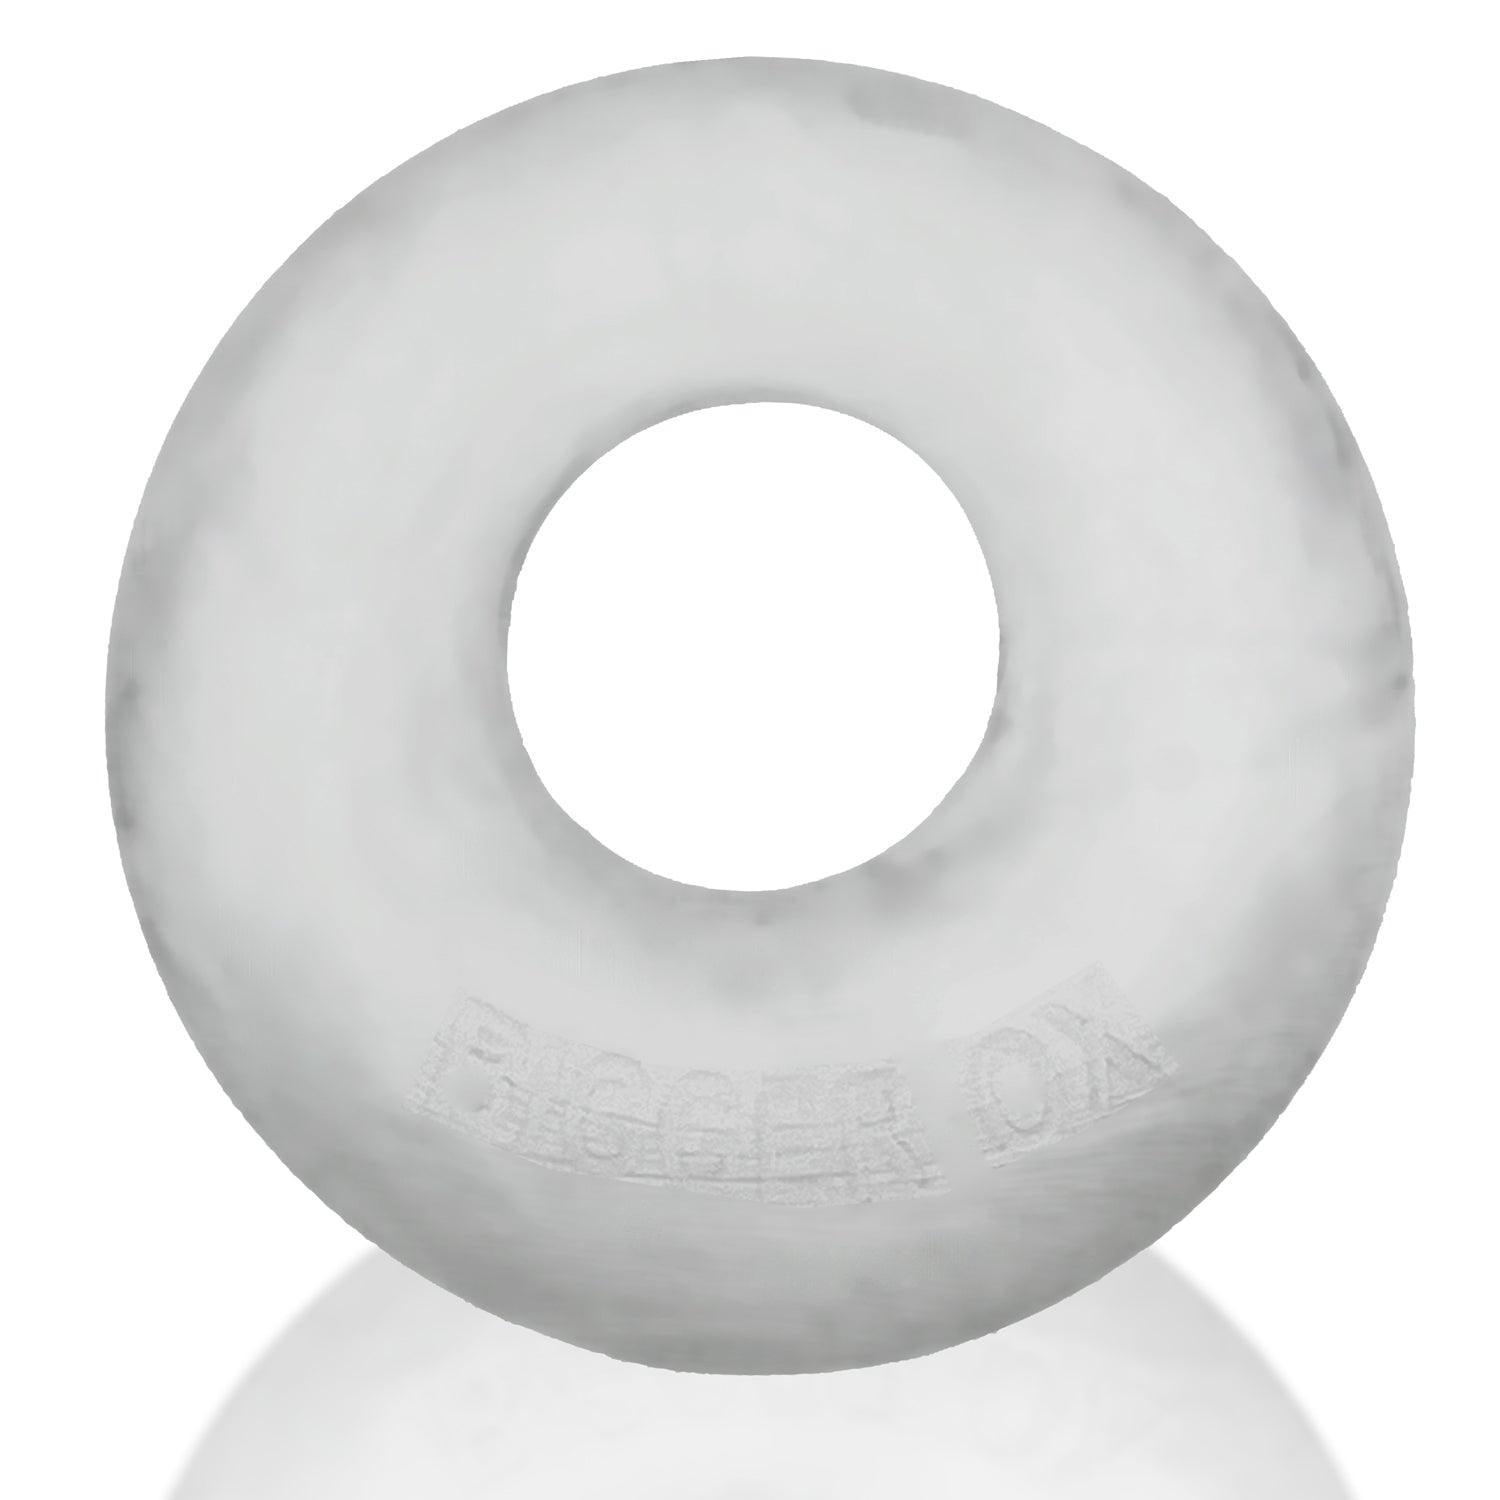 Bigger Ox Cockring - Clear Ice - My Sex Toy Hub